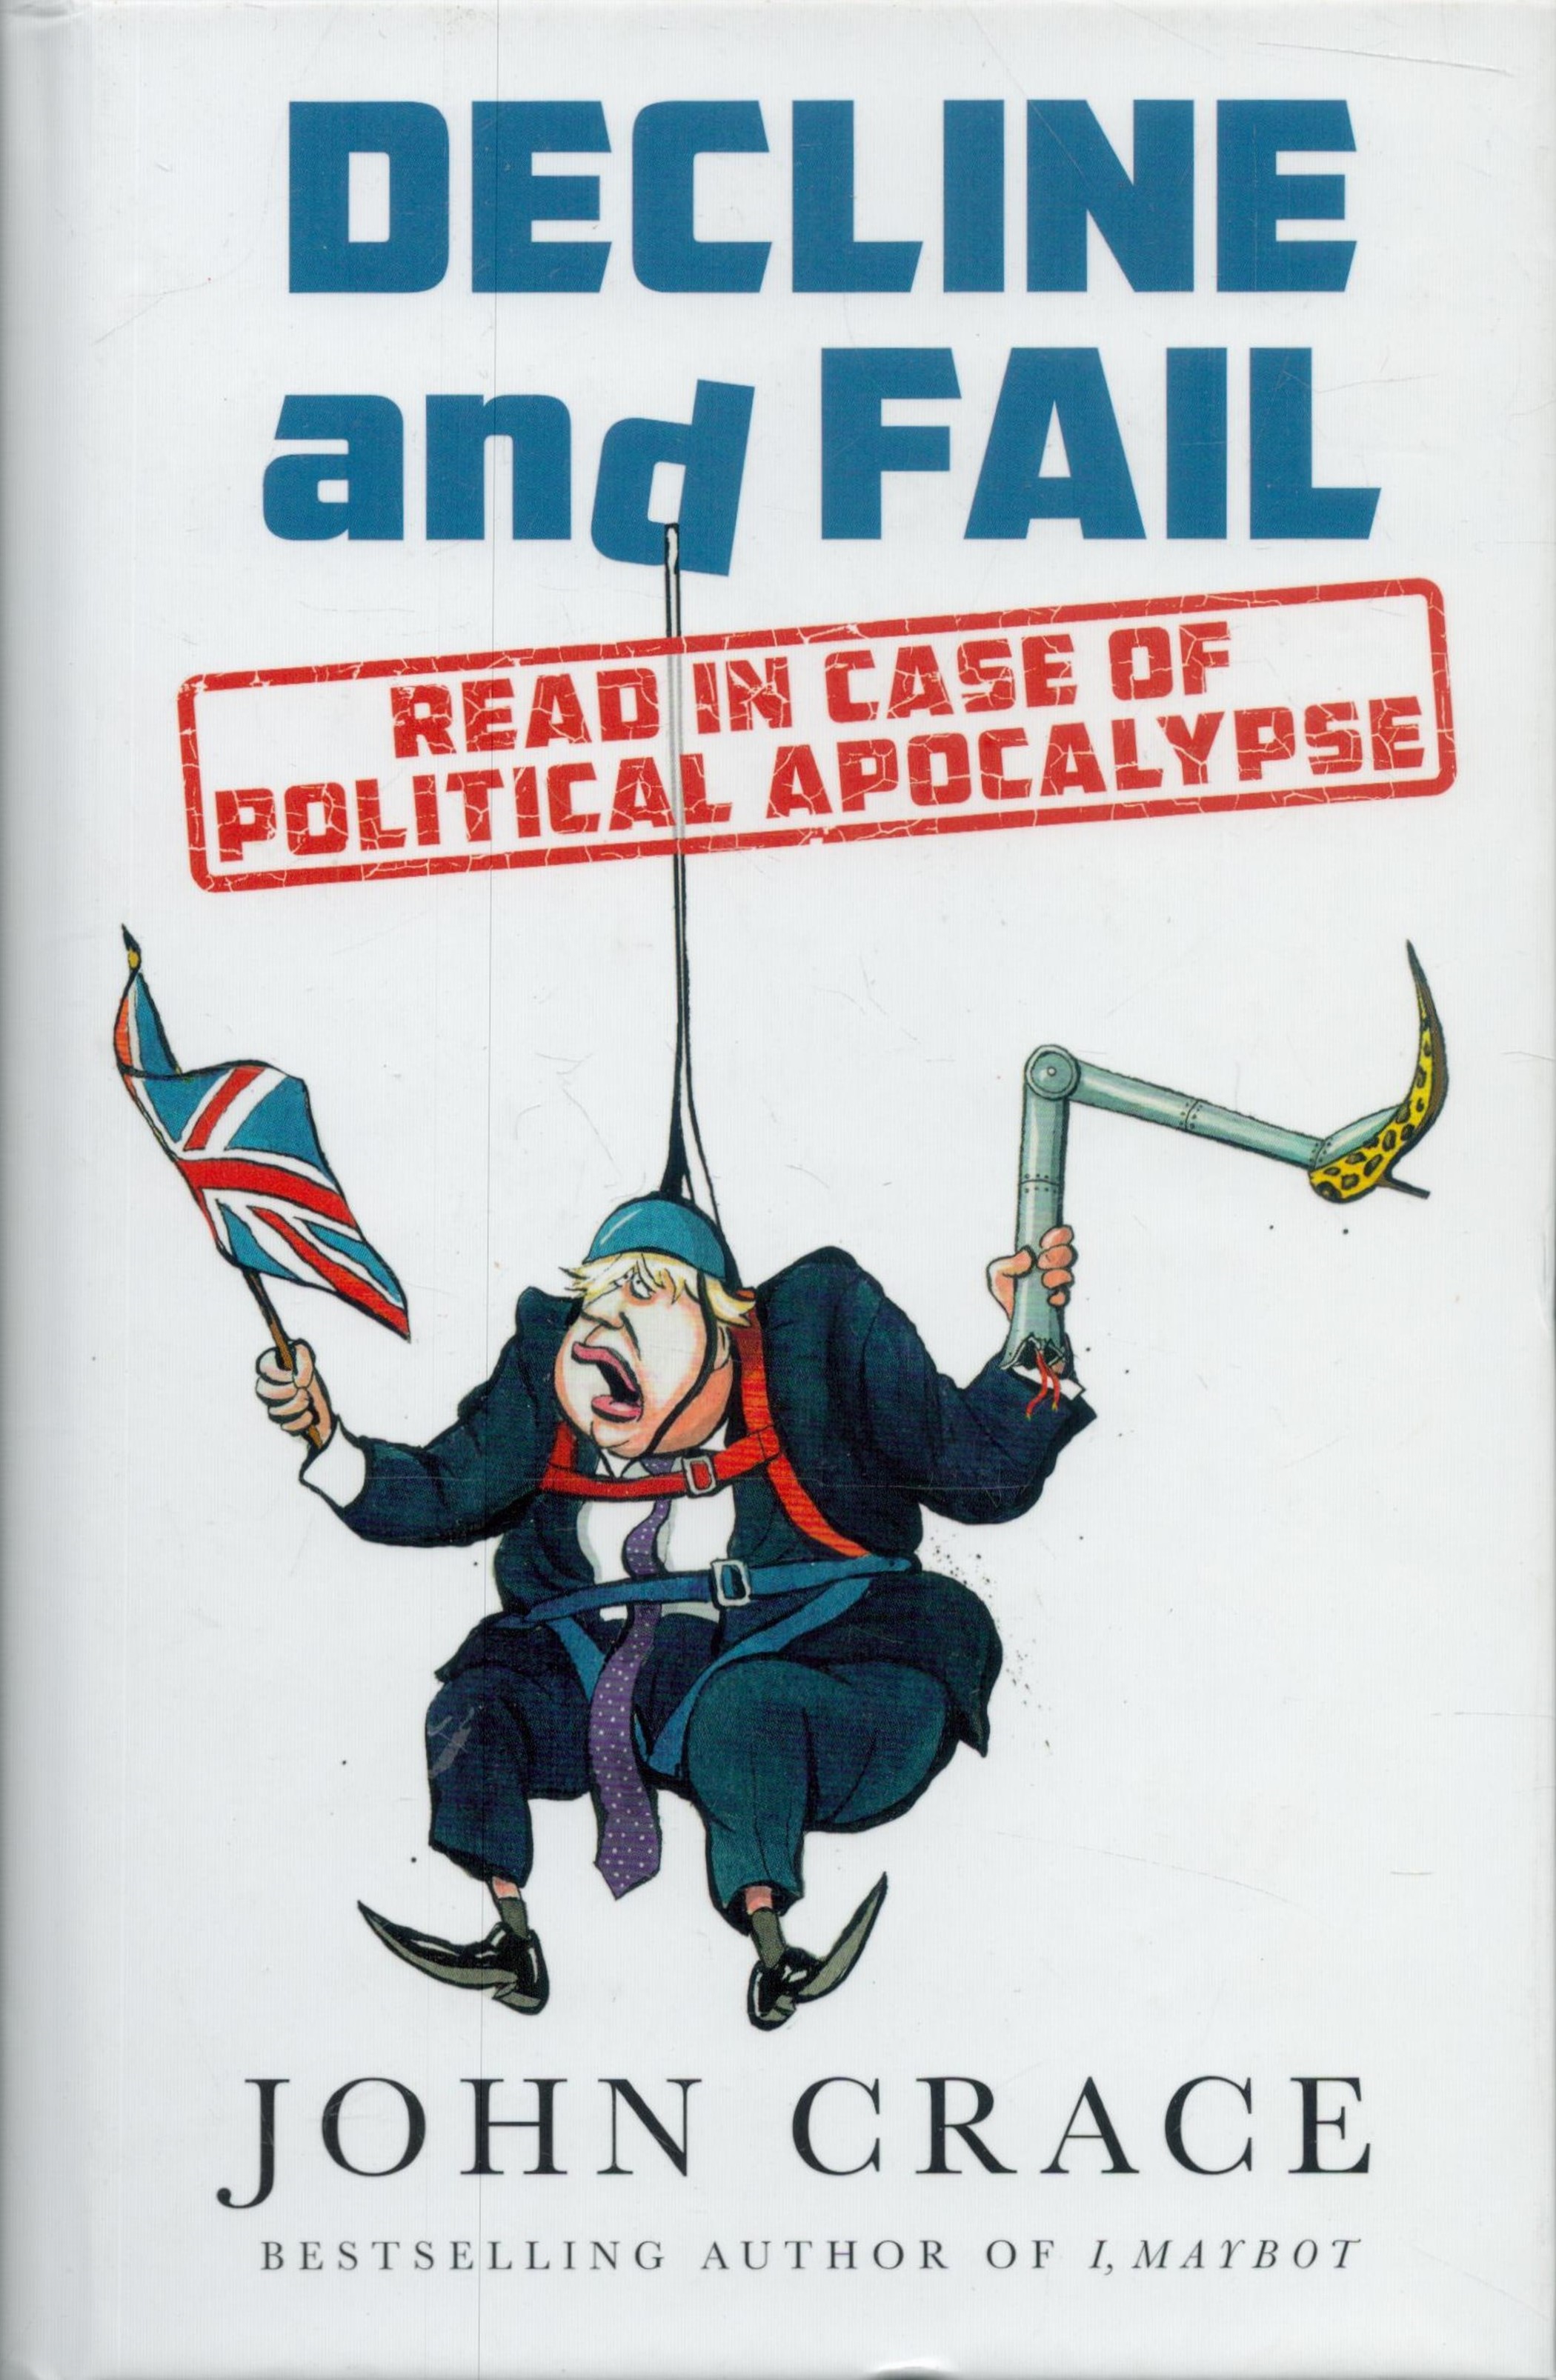 Decline and Fail - Read in case of Political Apocalypse by John Grace 2019 First Edition Hardback